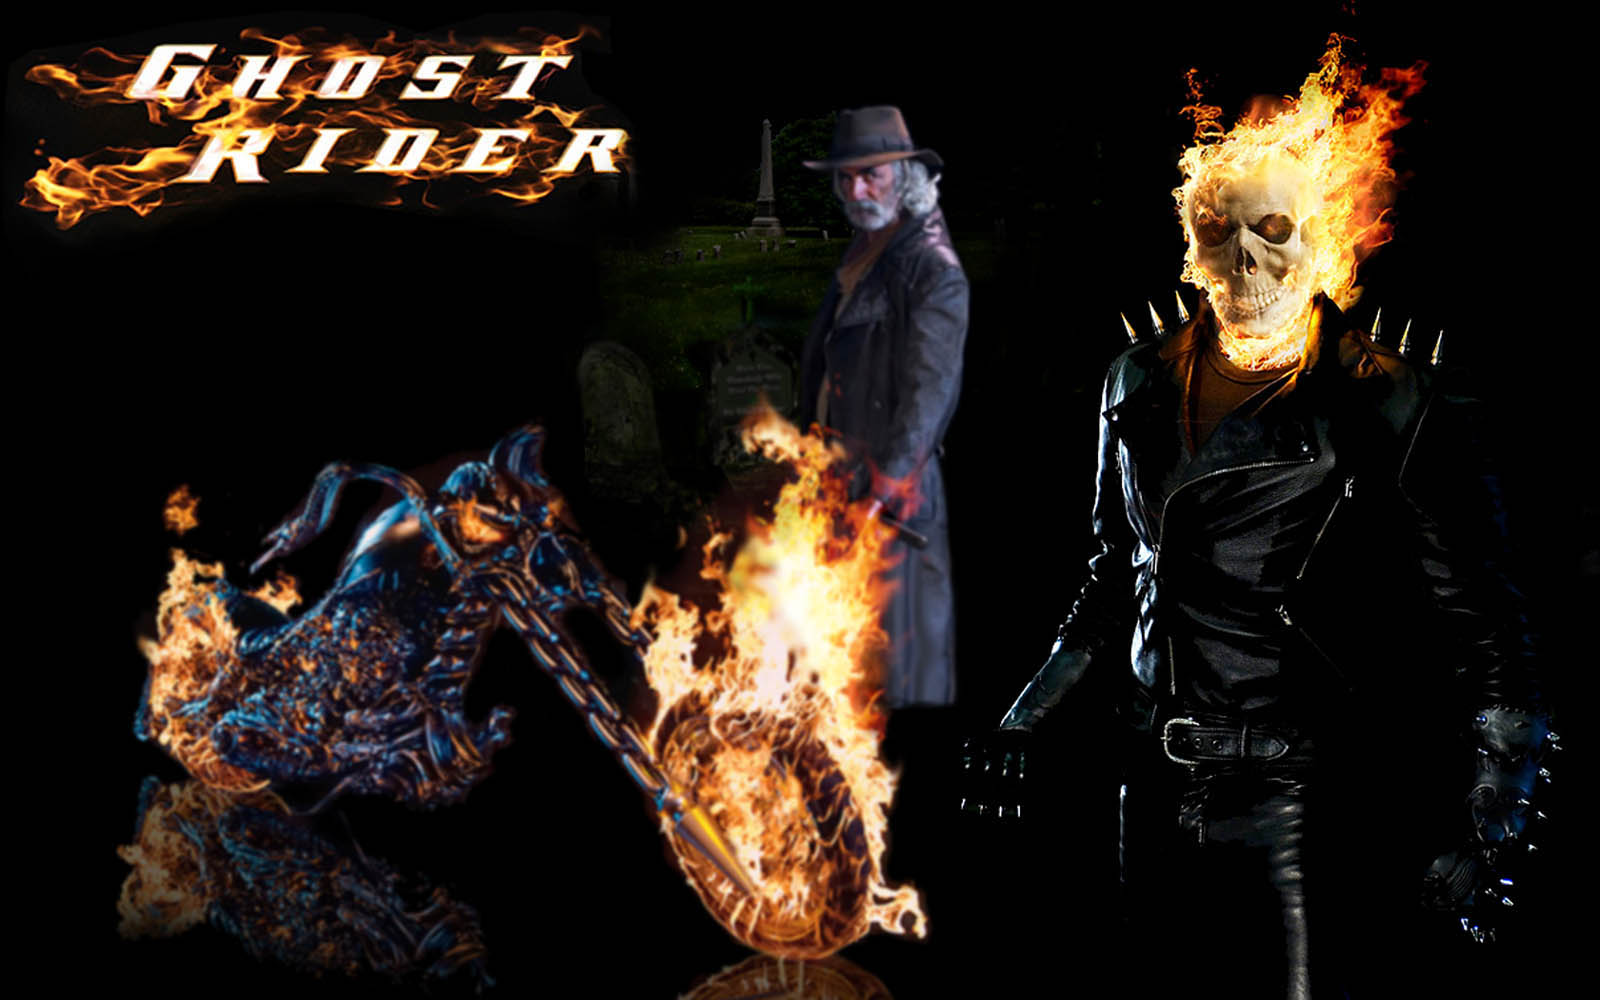 Tag Ghost Rider Wallpapers Images Photos Pictures and Backgrounds